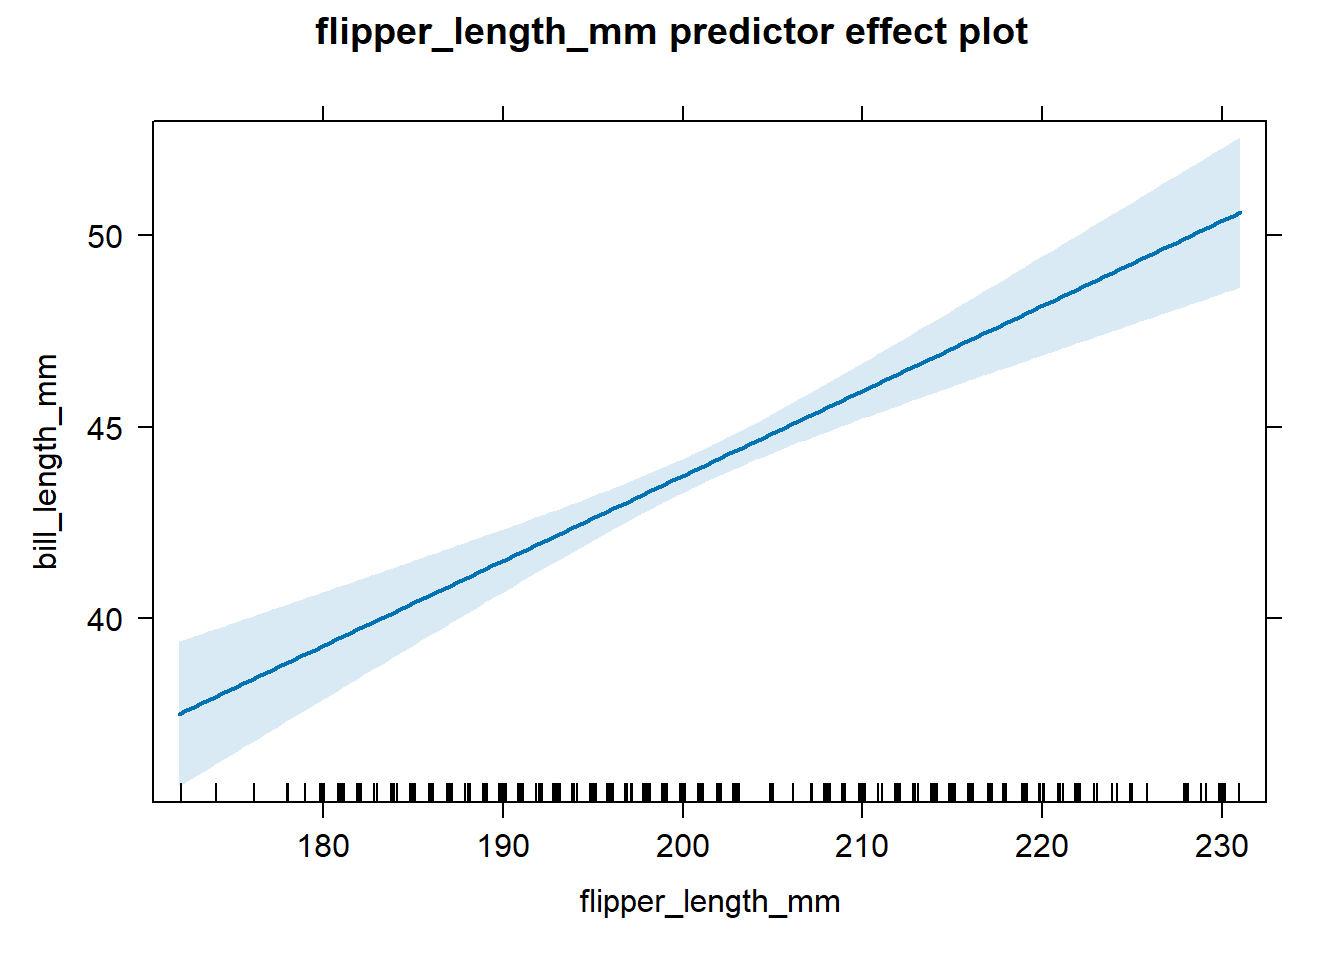 Effect plot for flipper length based on the fitted model in Equation \@ref(eq:mlr-effect-equation).